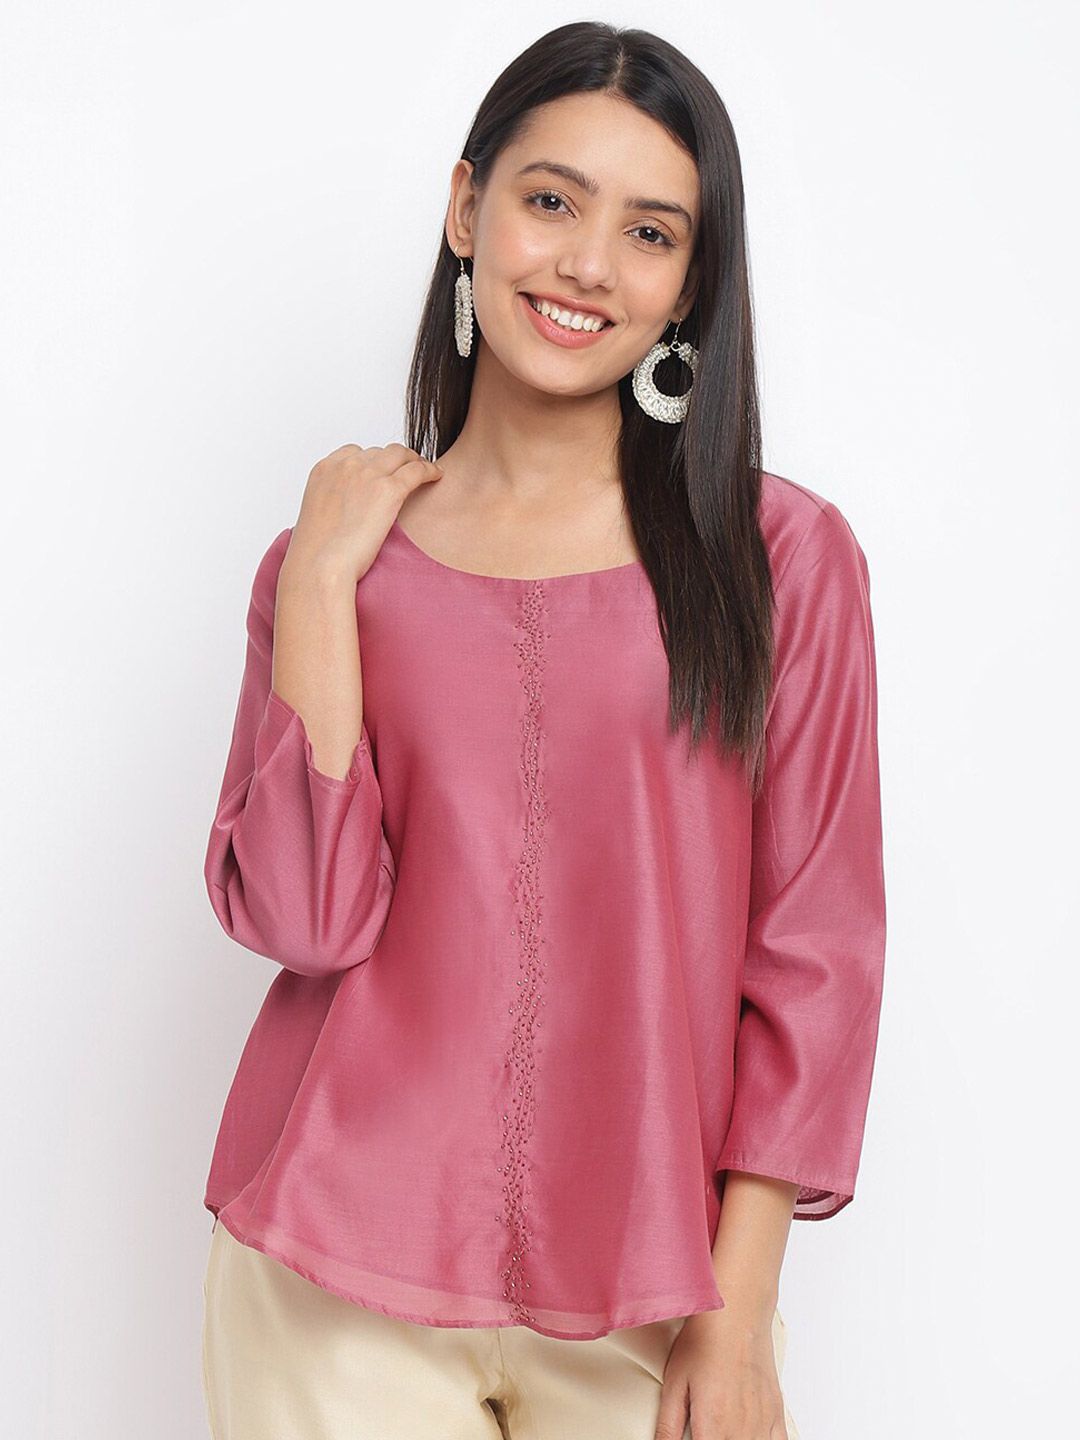 Fabindia Women Pink Solid A-Line Top with Beaded Detail Price in India